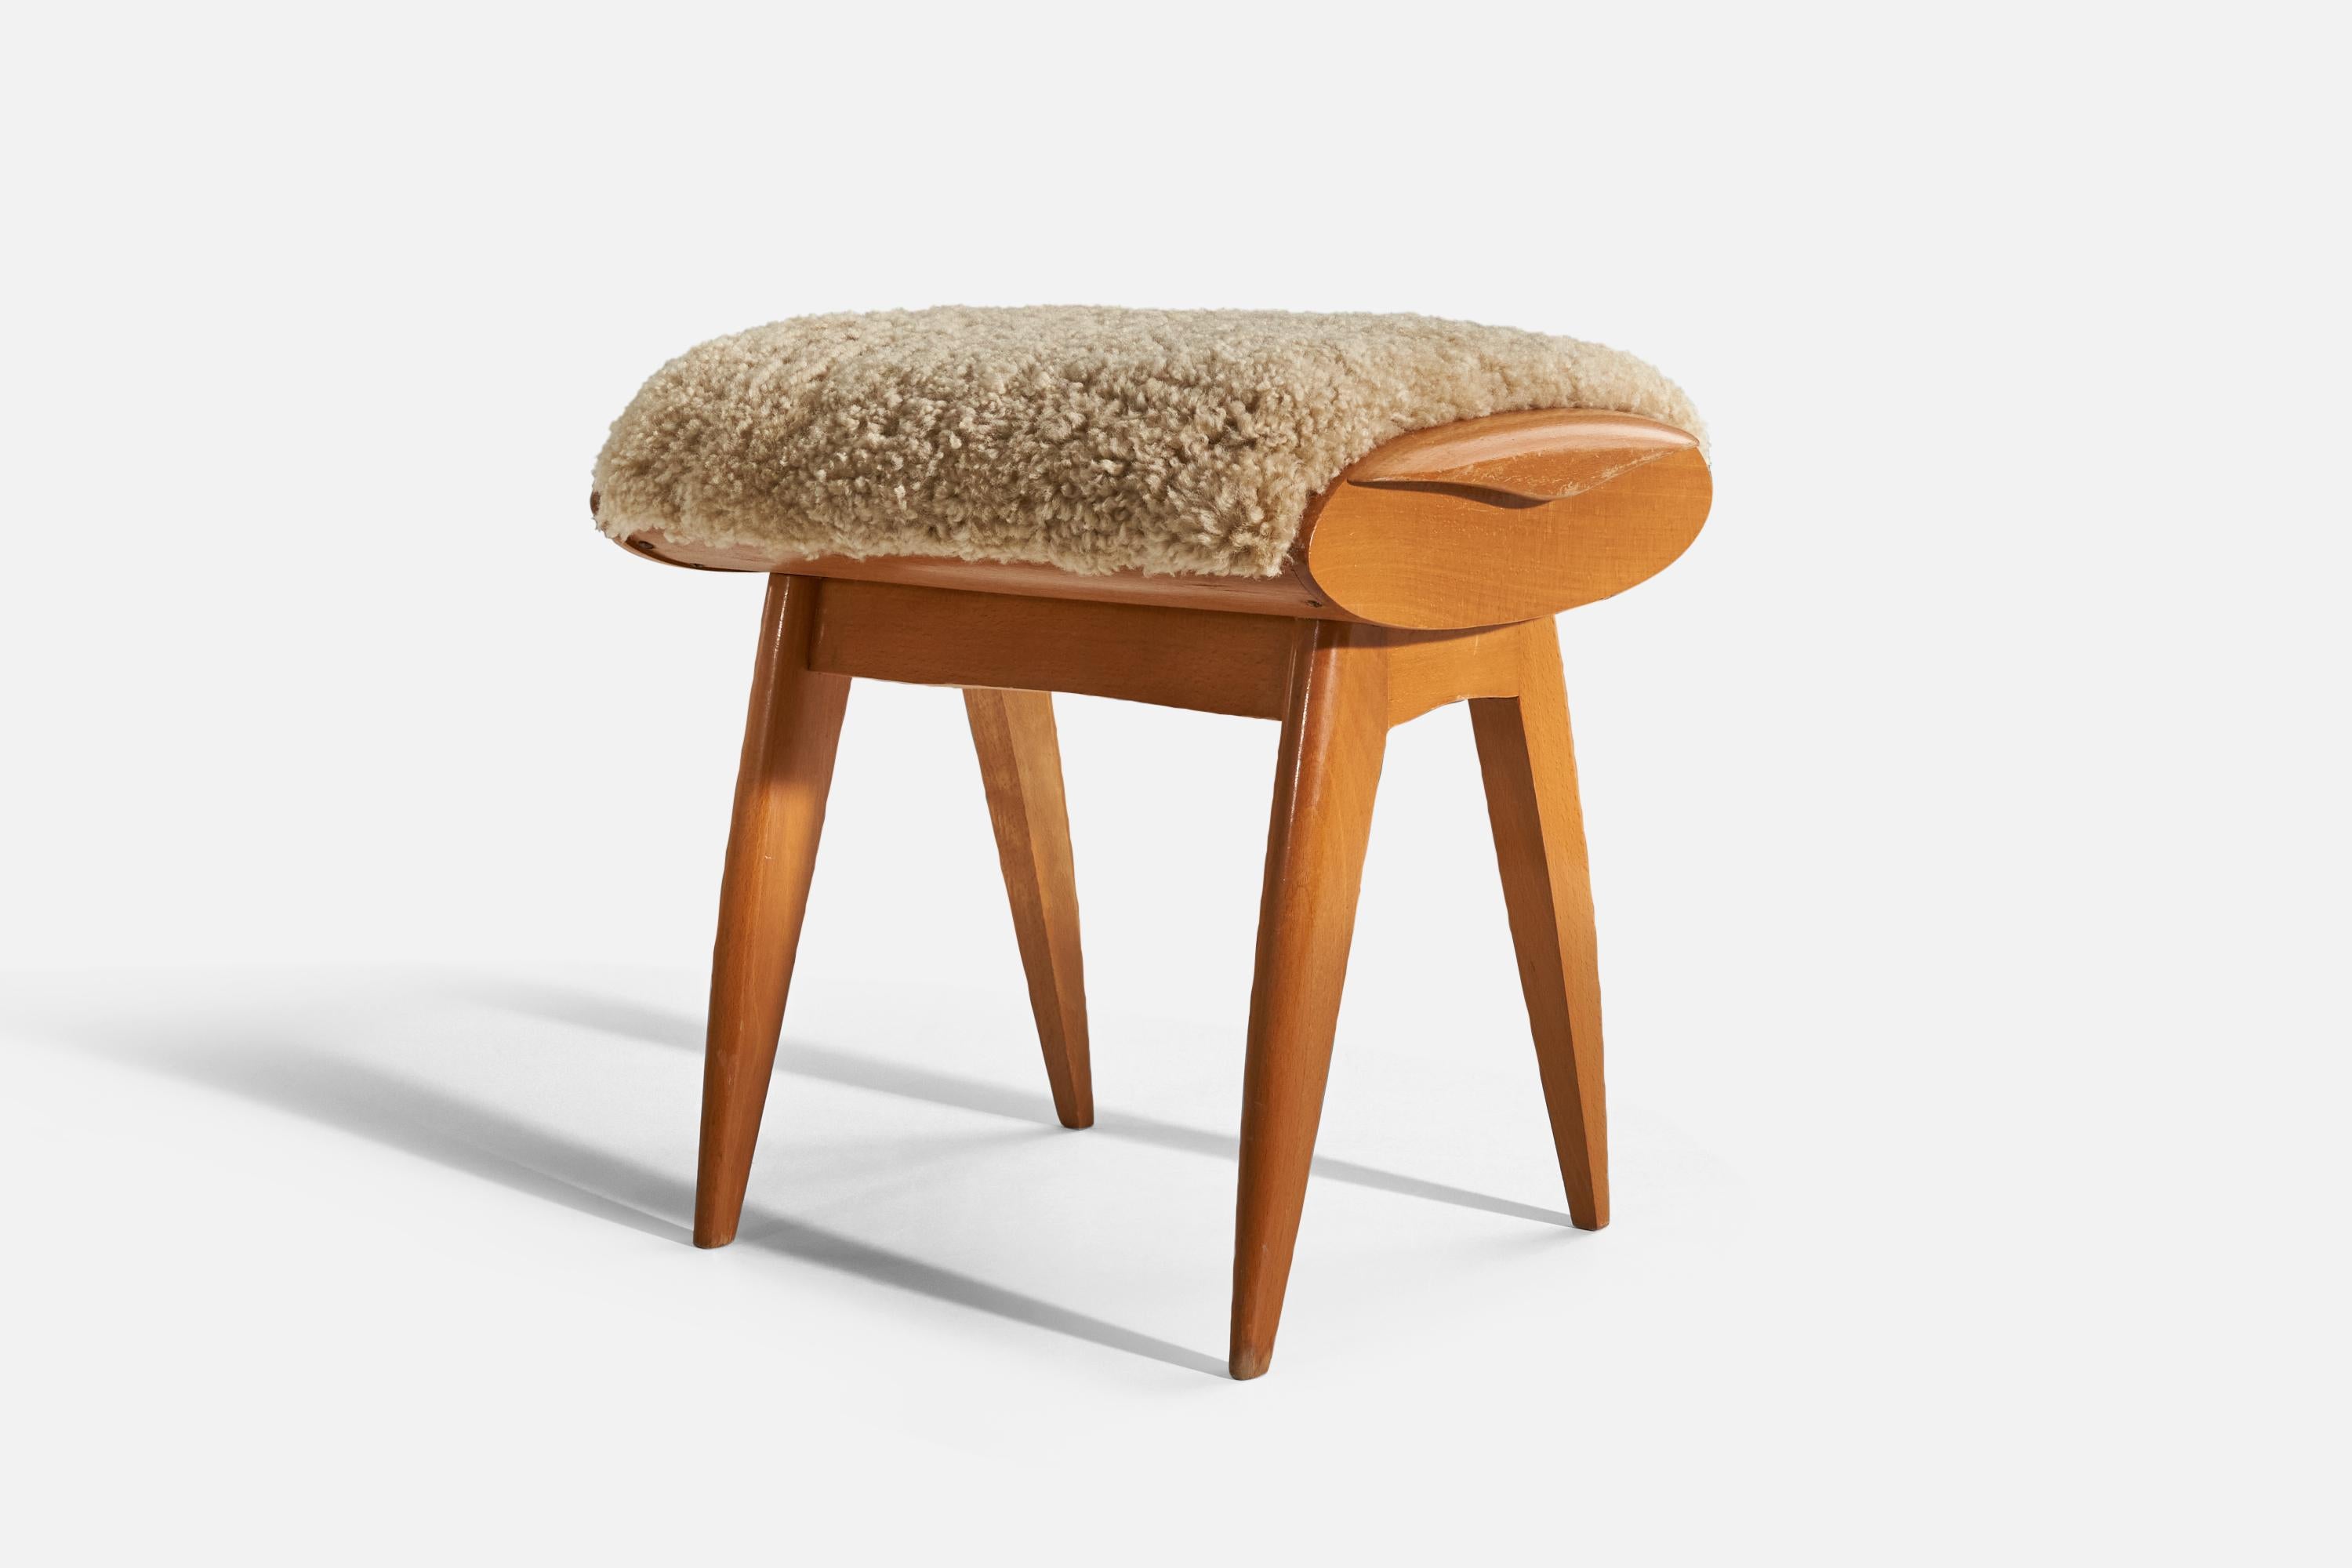 A wood and sheepskin stool designed and produced by a Swedish designer, Sweden, c. 1950s.